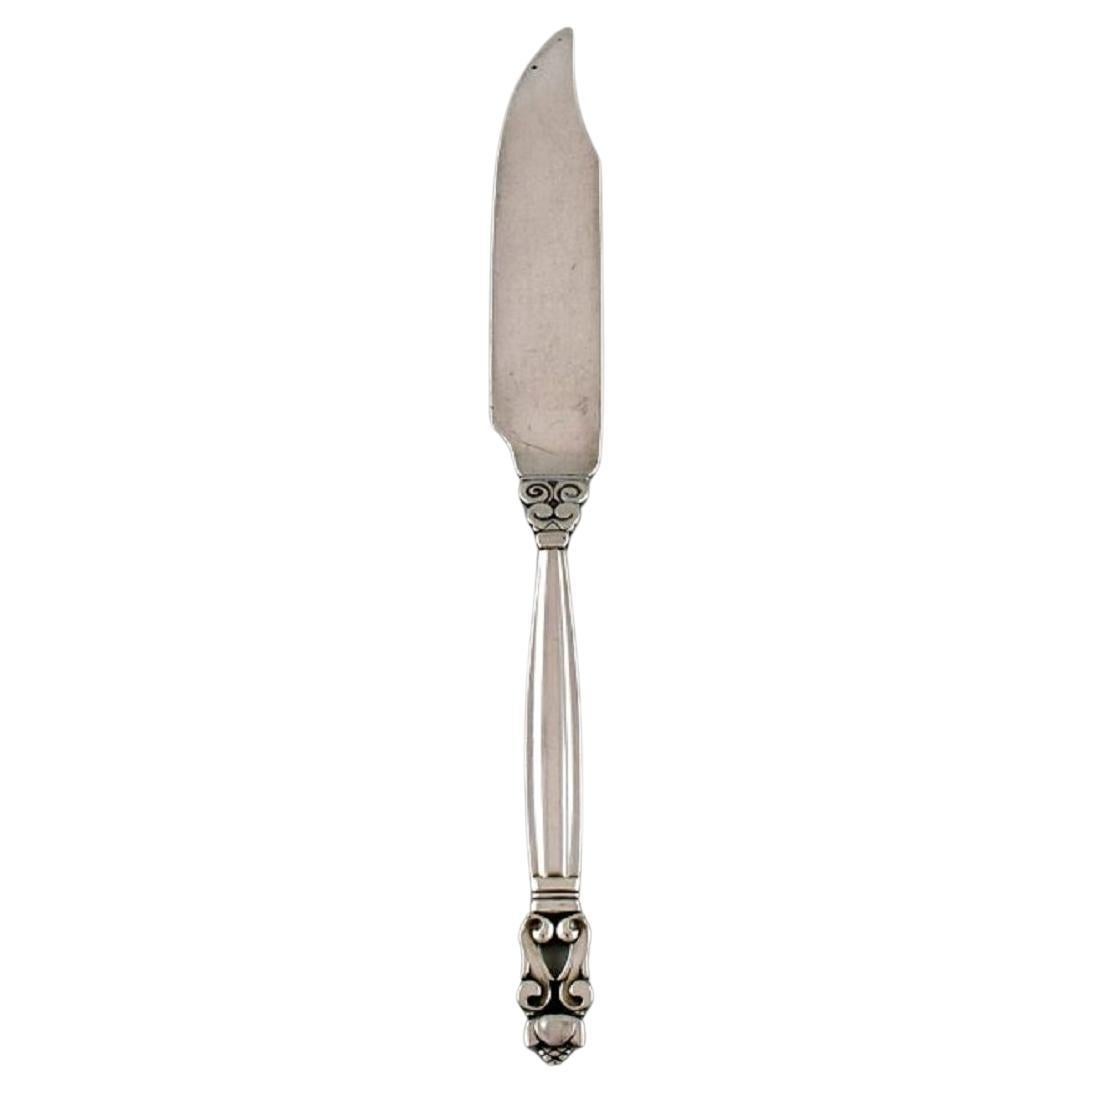 Fish Knife in Sterling Silver, Georg Jensen Style, 1930s / 40s For Sale